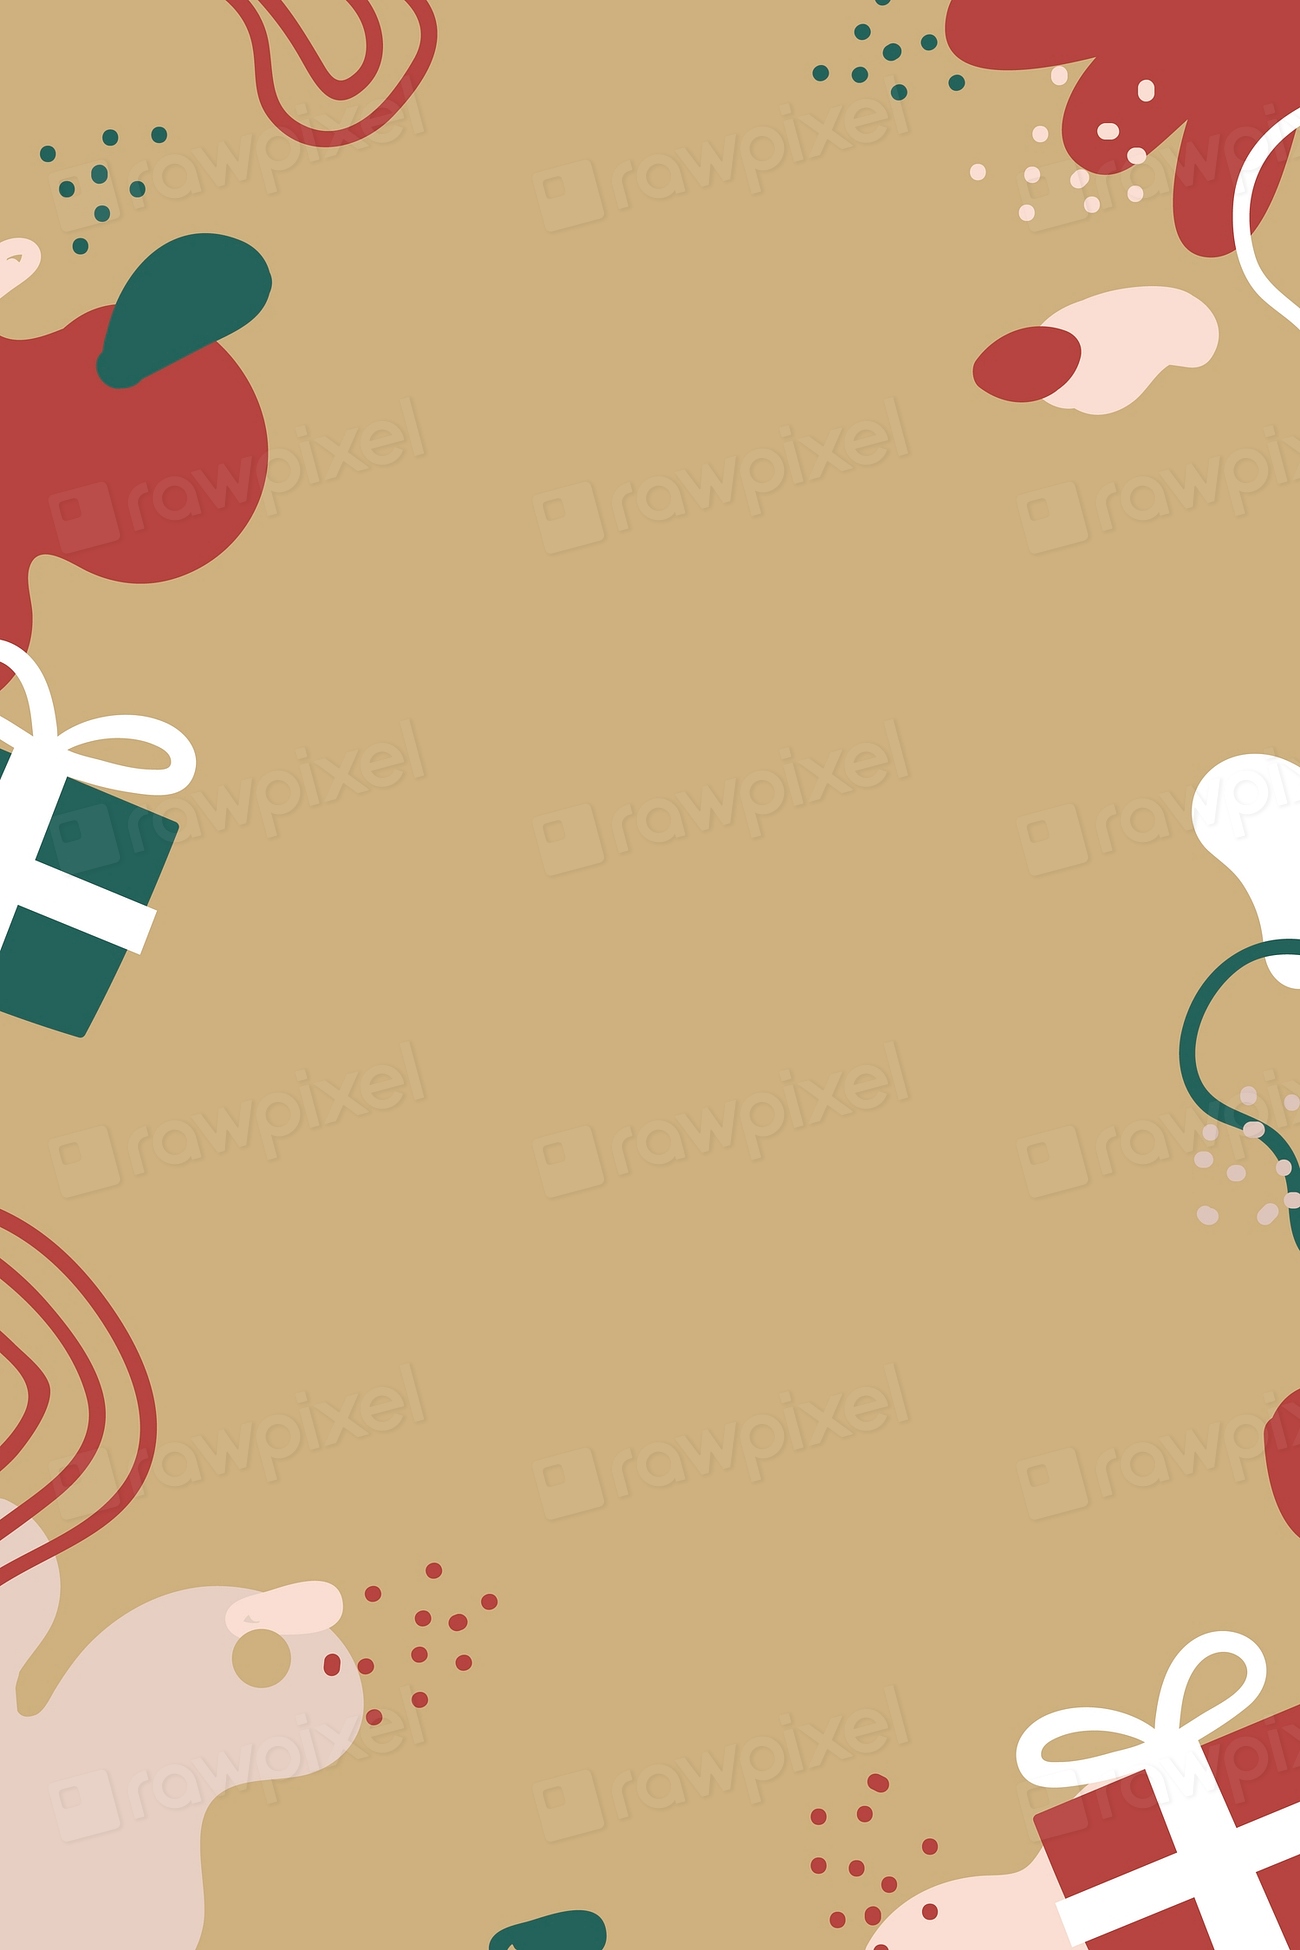 Christmas patterned on brown background | Premium Vector - rawpixel